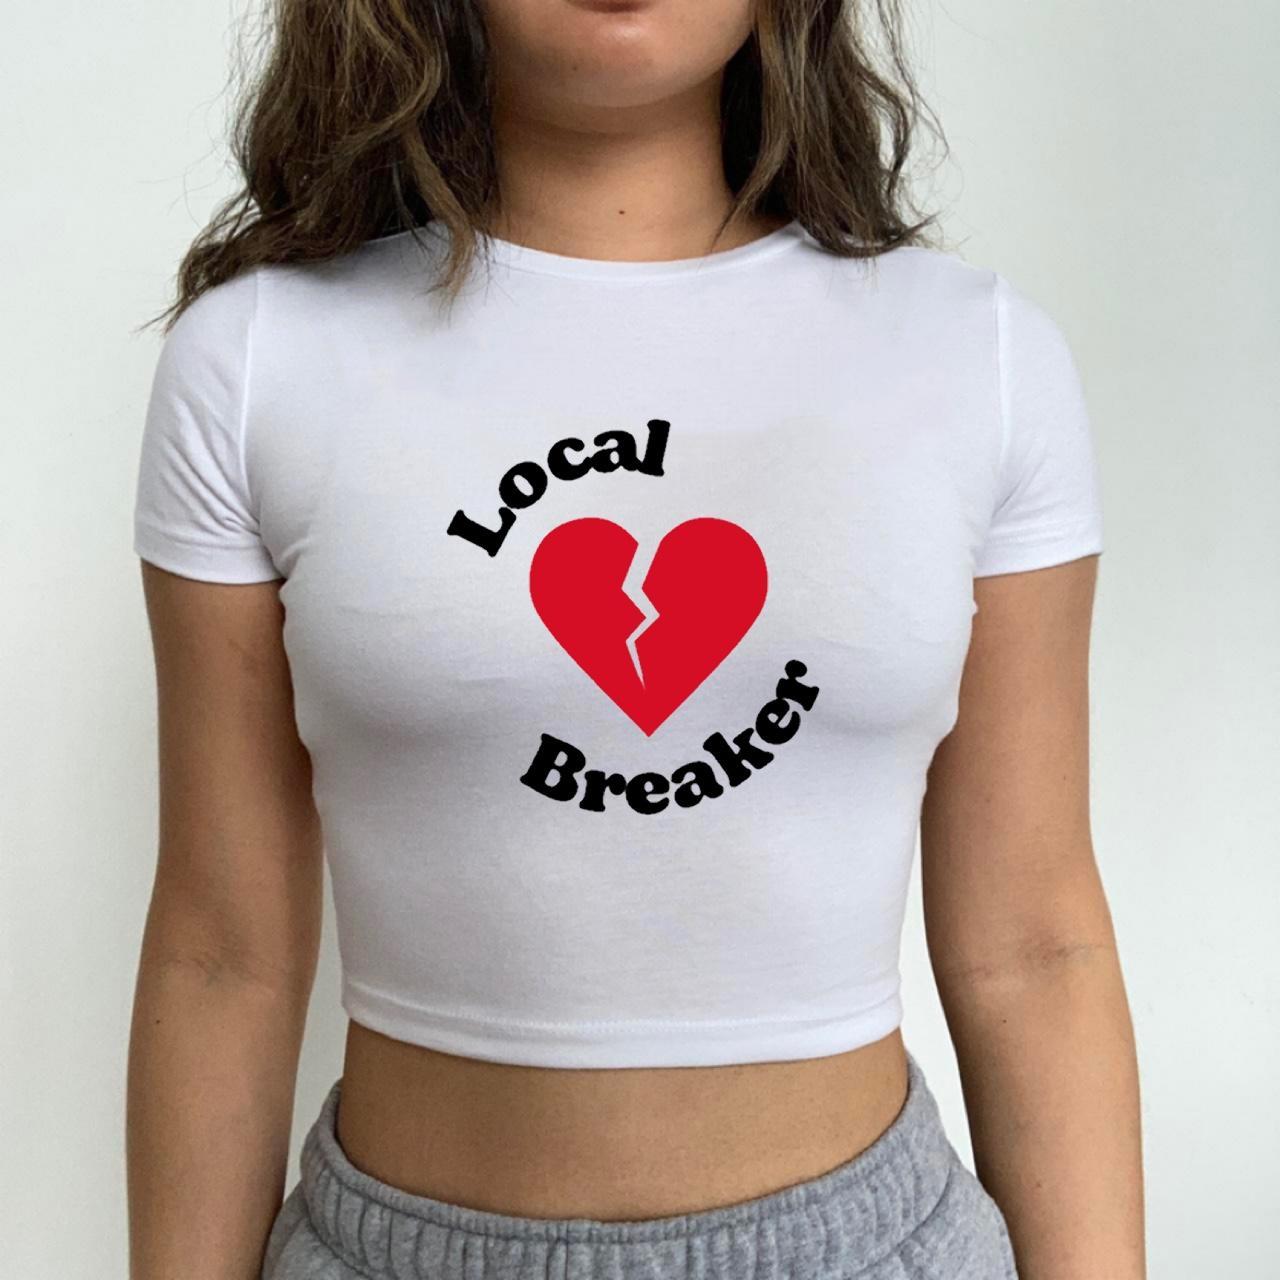 Product Image 1 - ☆ “Local 💔 breaker” white